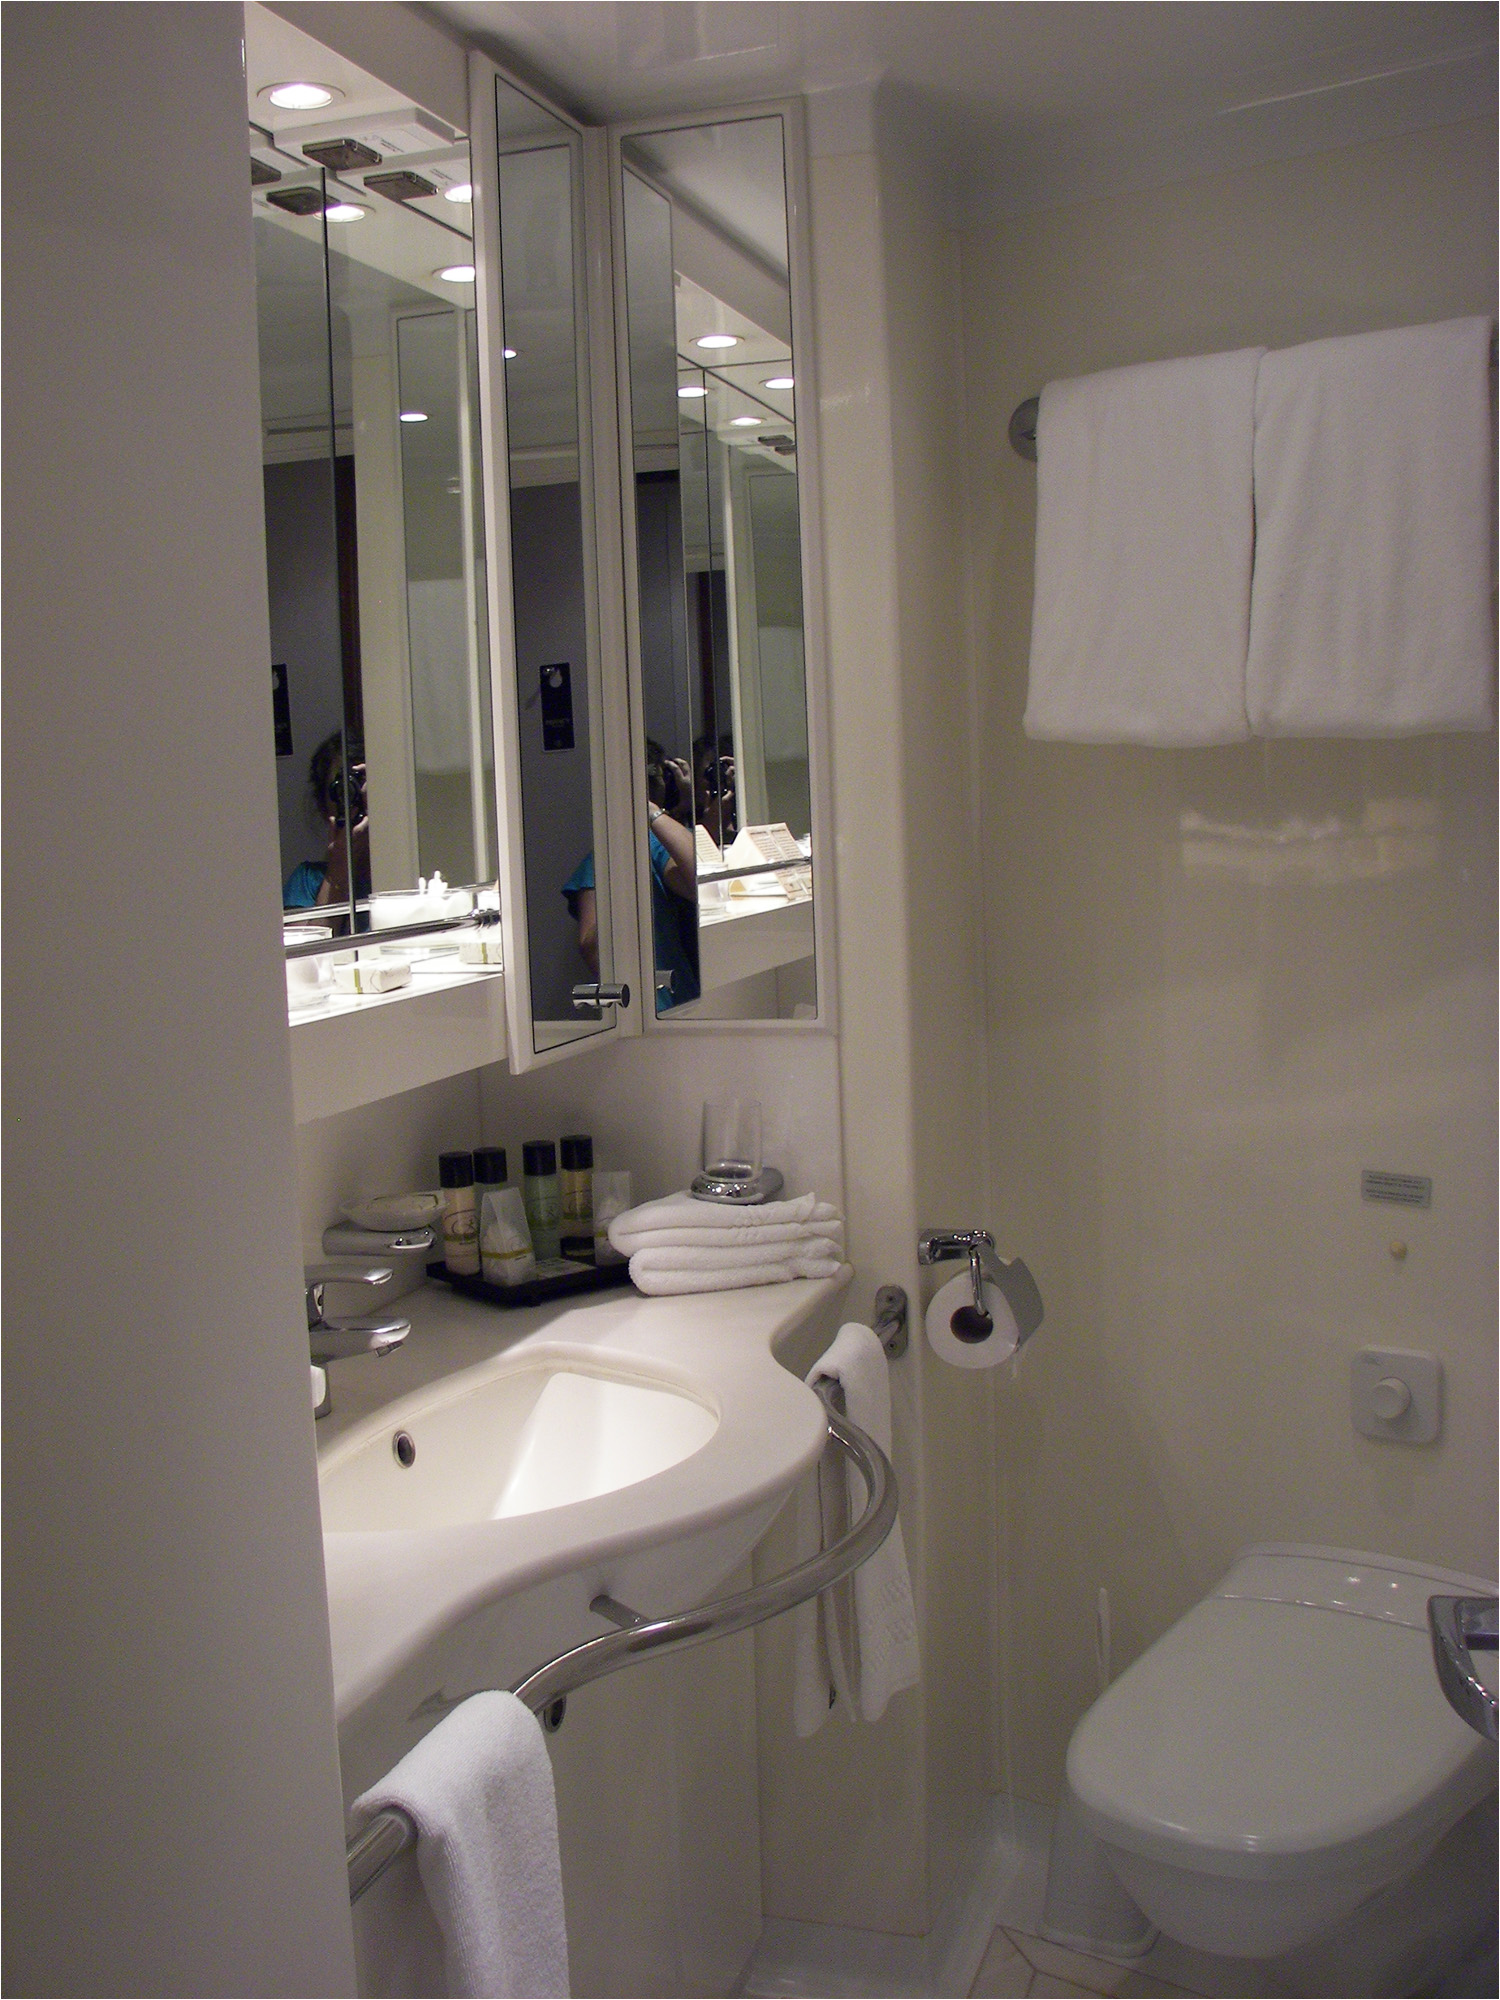 The stateeroom came with a very spacious bathroom, including a full size bathtub.